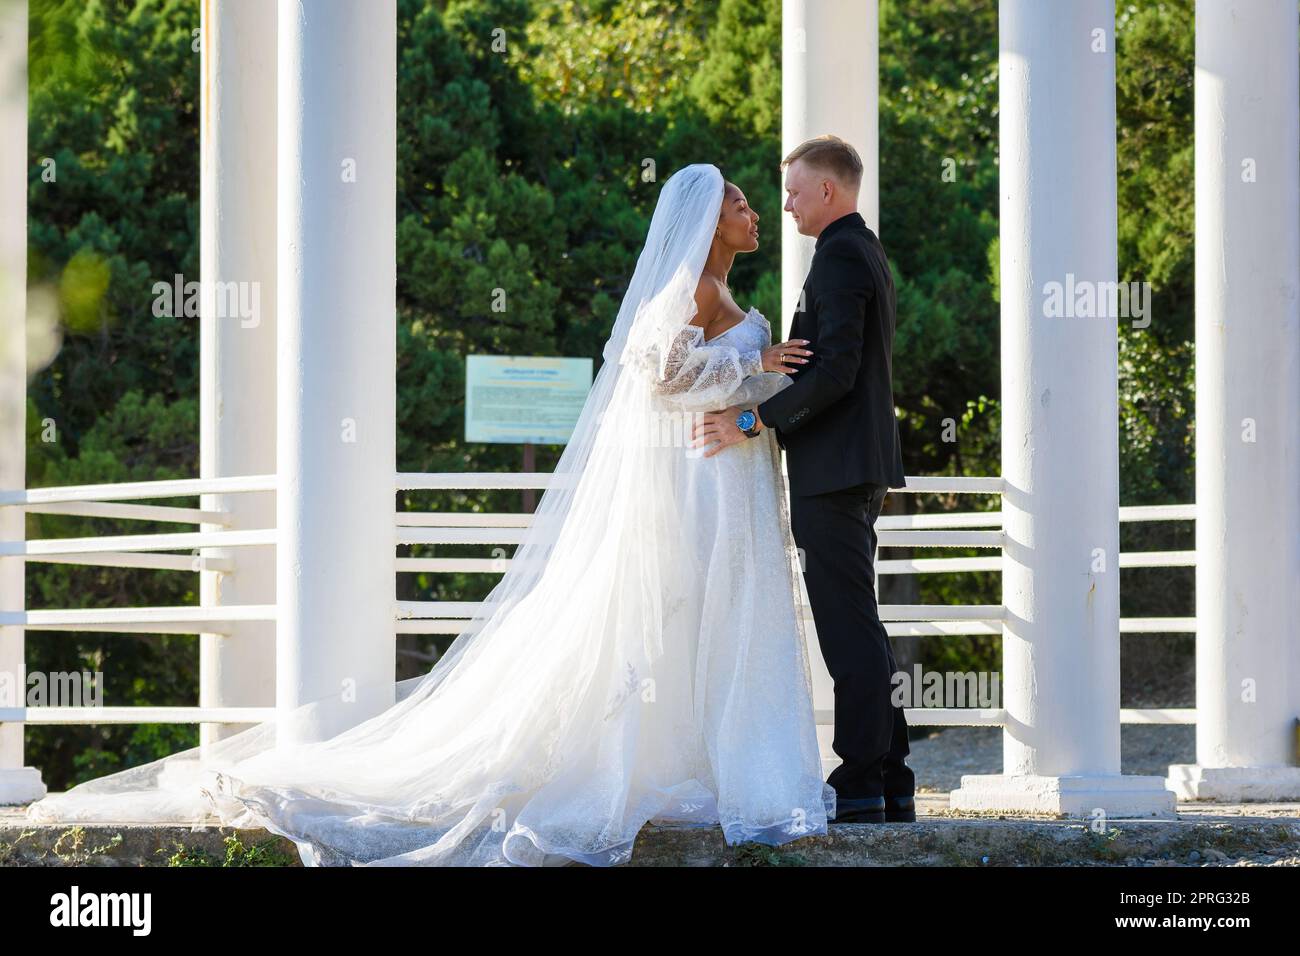 Mixed-racial newlyweds on a walk hugging against the backdrop of a beautiful gazebo Stock Photo